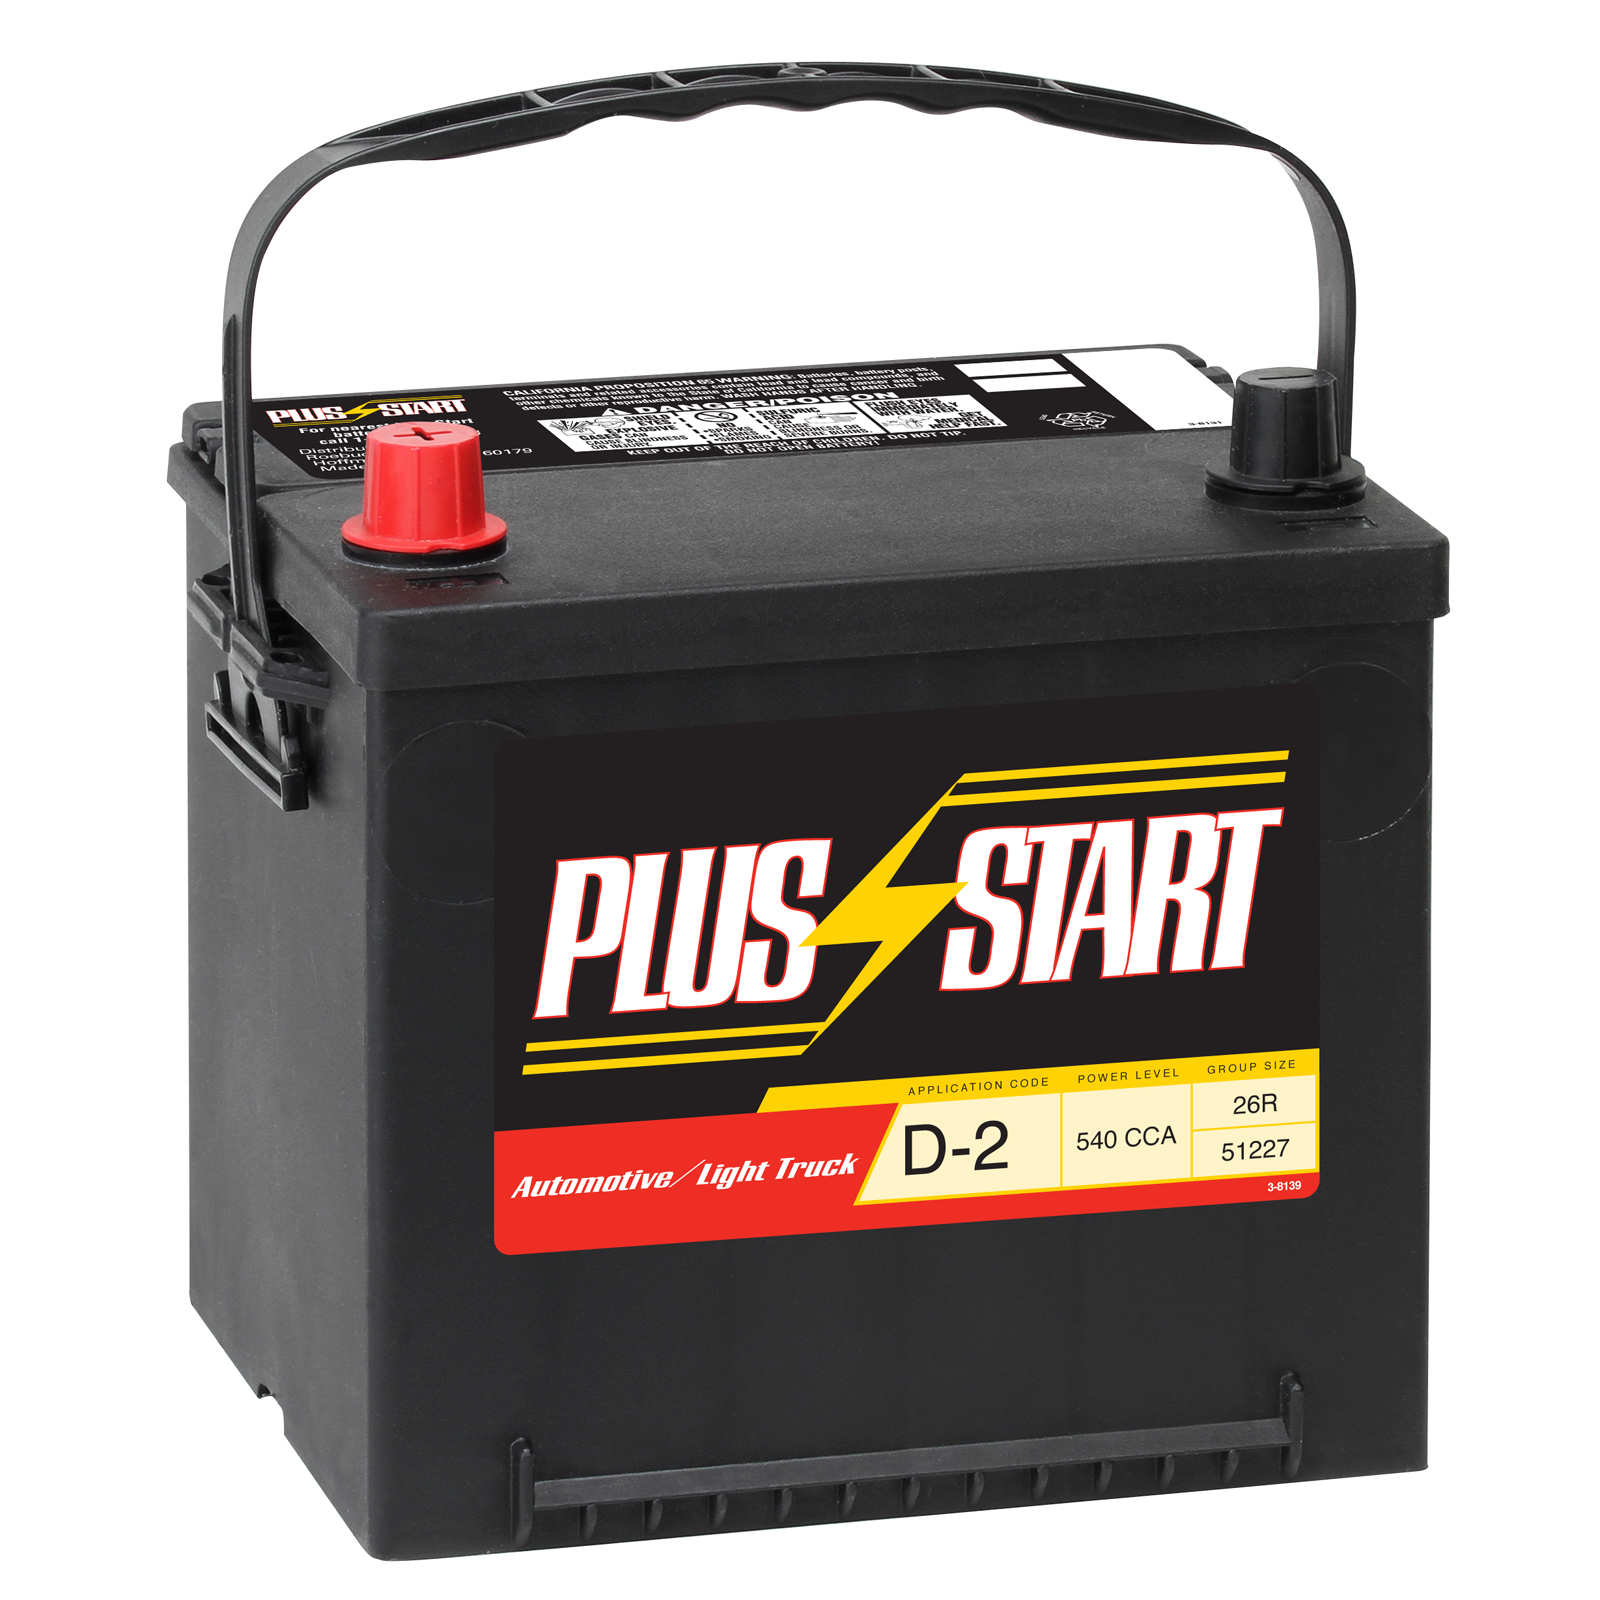 Plus Start Automotive Battery - Group Size EP-26R (Price ... from c.shld.ne...